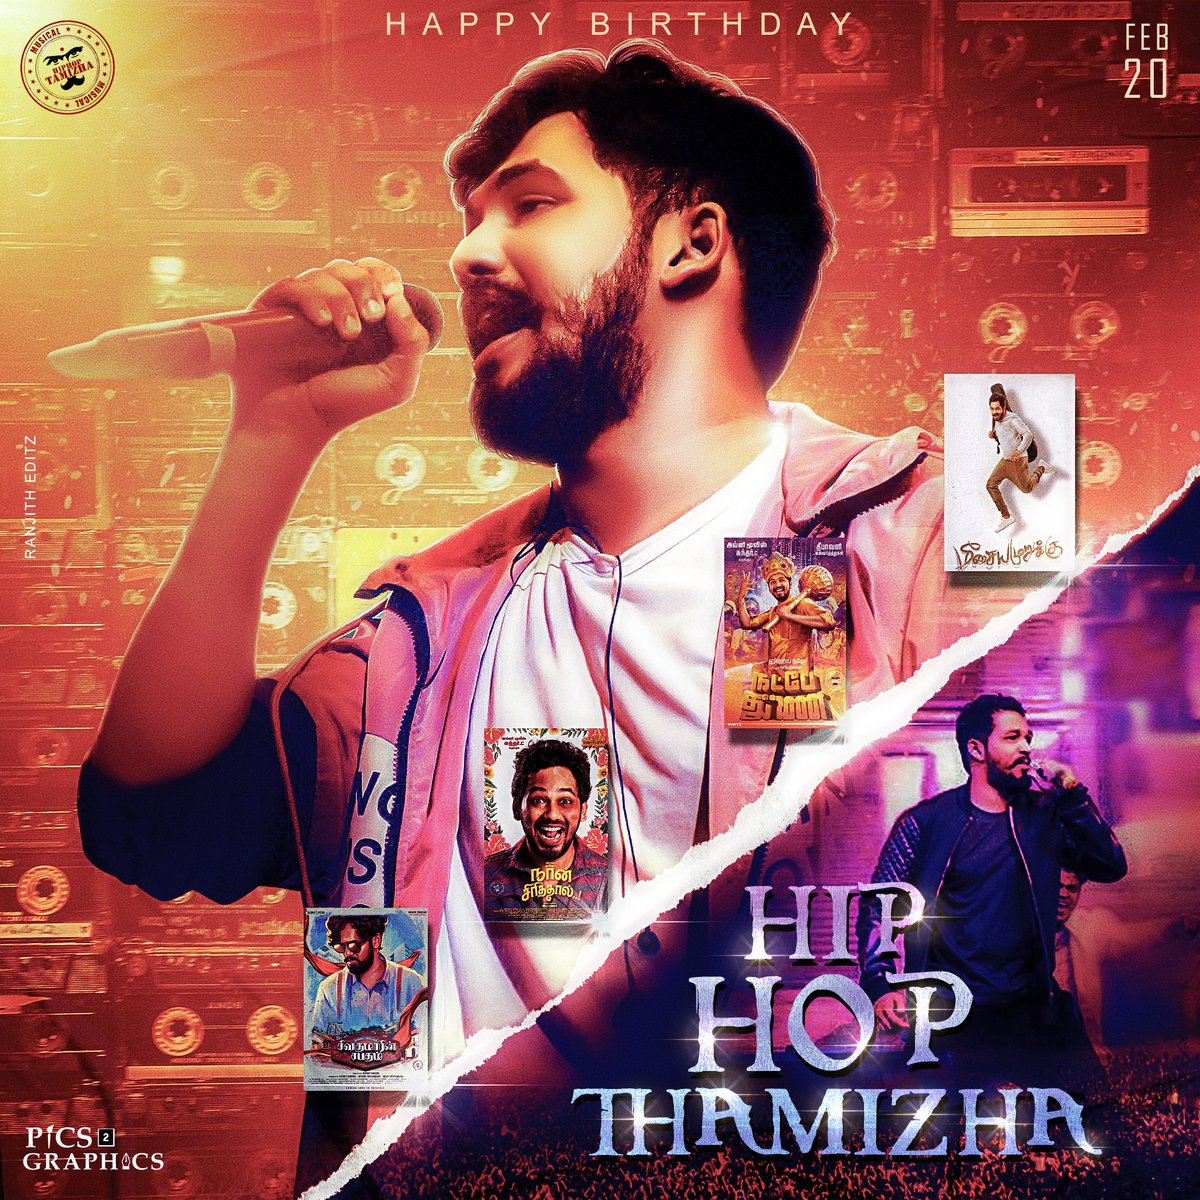 Happy to Unvelling the Special CDP for Our @hiphoptamizha

Wishing the hard-working , humble and successful #Hiphoptamizha Bro a Flourishing Birthday..

Wishing him a Blockbuster year ahead.. :-)

#HBDHipHopThamizha
#HBDHiphopAdhi @No1FanofHHT @hhtyouthicon @Hiphop_Tamizha